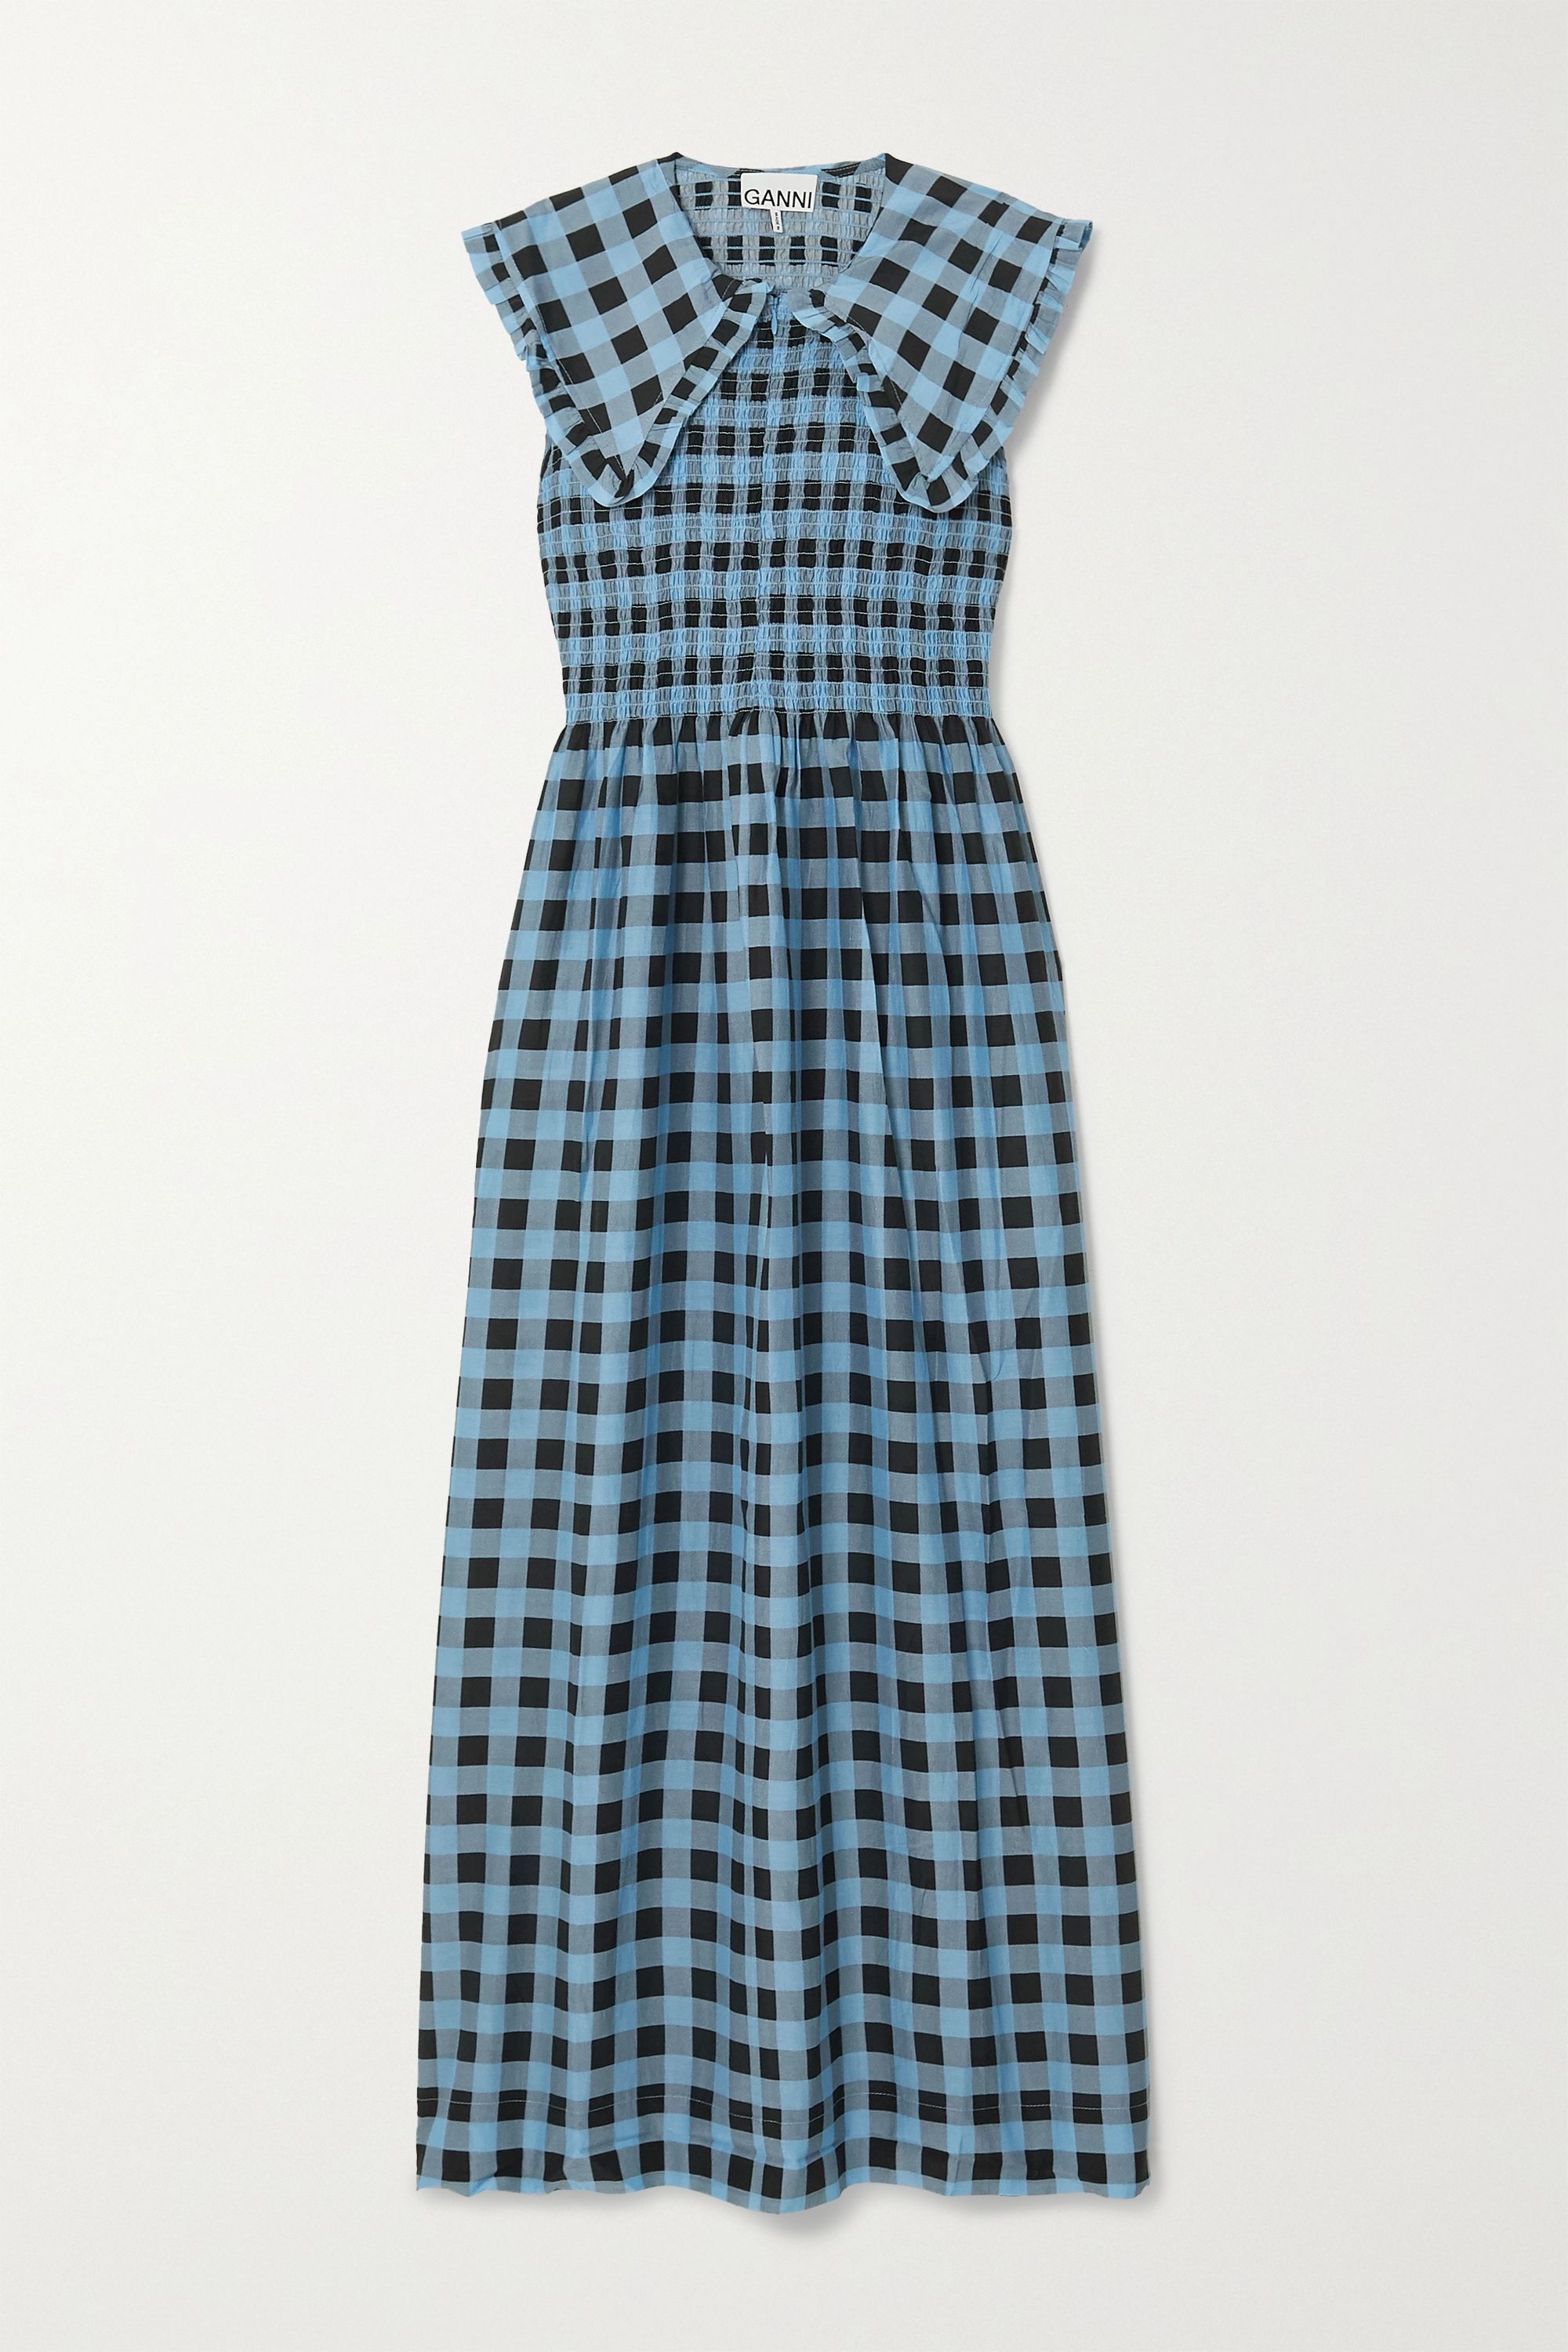 Ganni Smocked Checked Cotton and Silk-Blend Maxi Dress